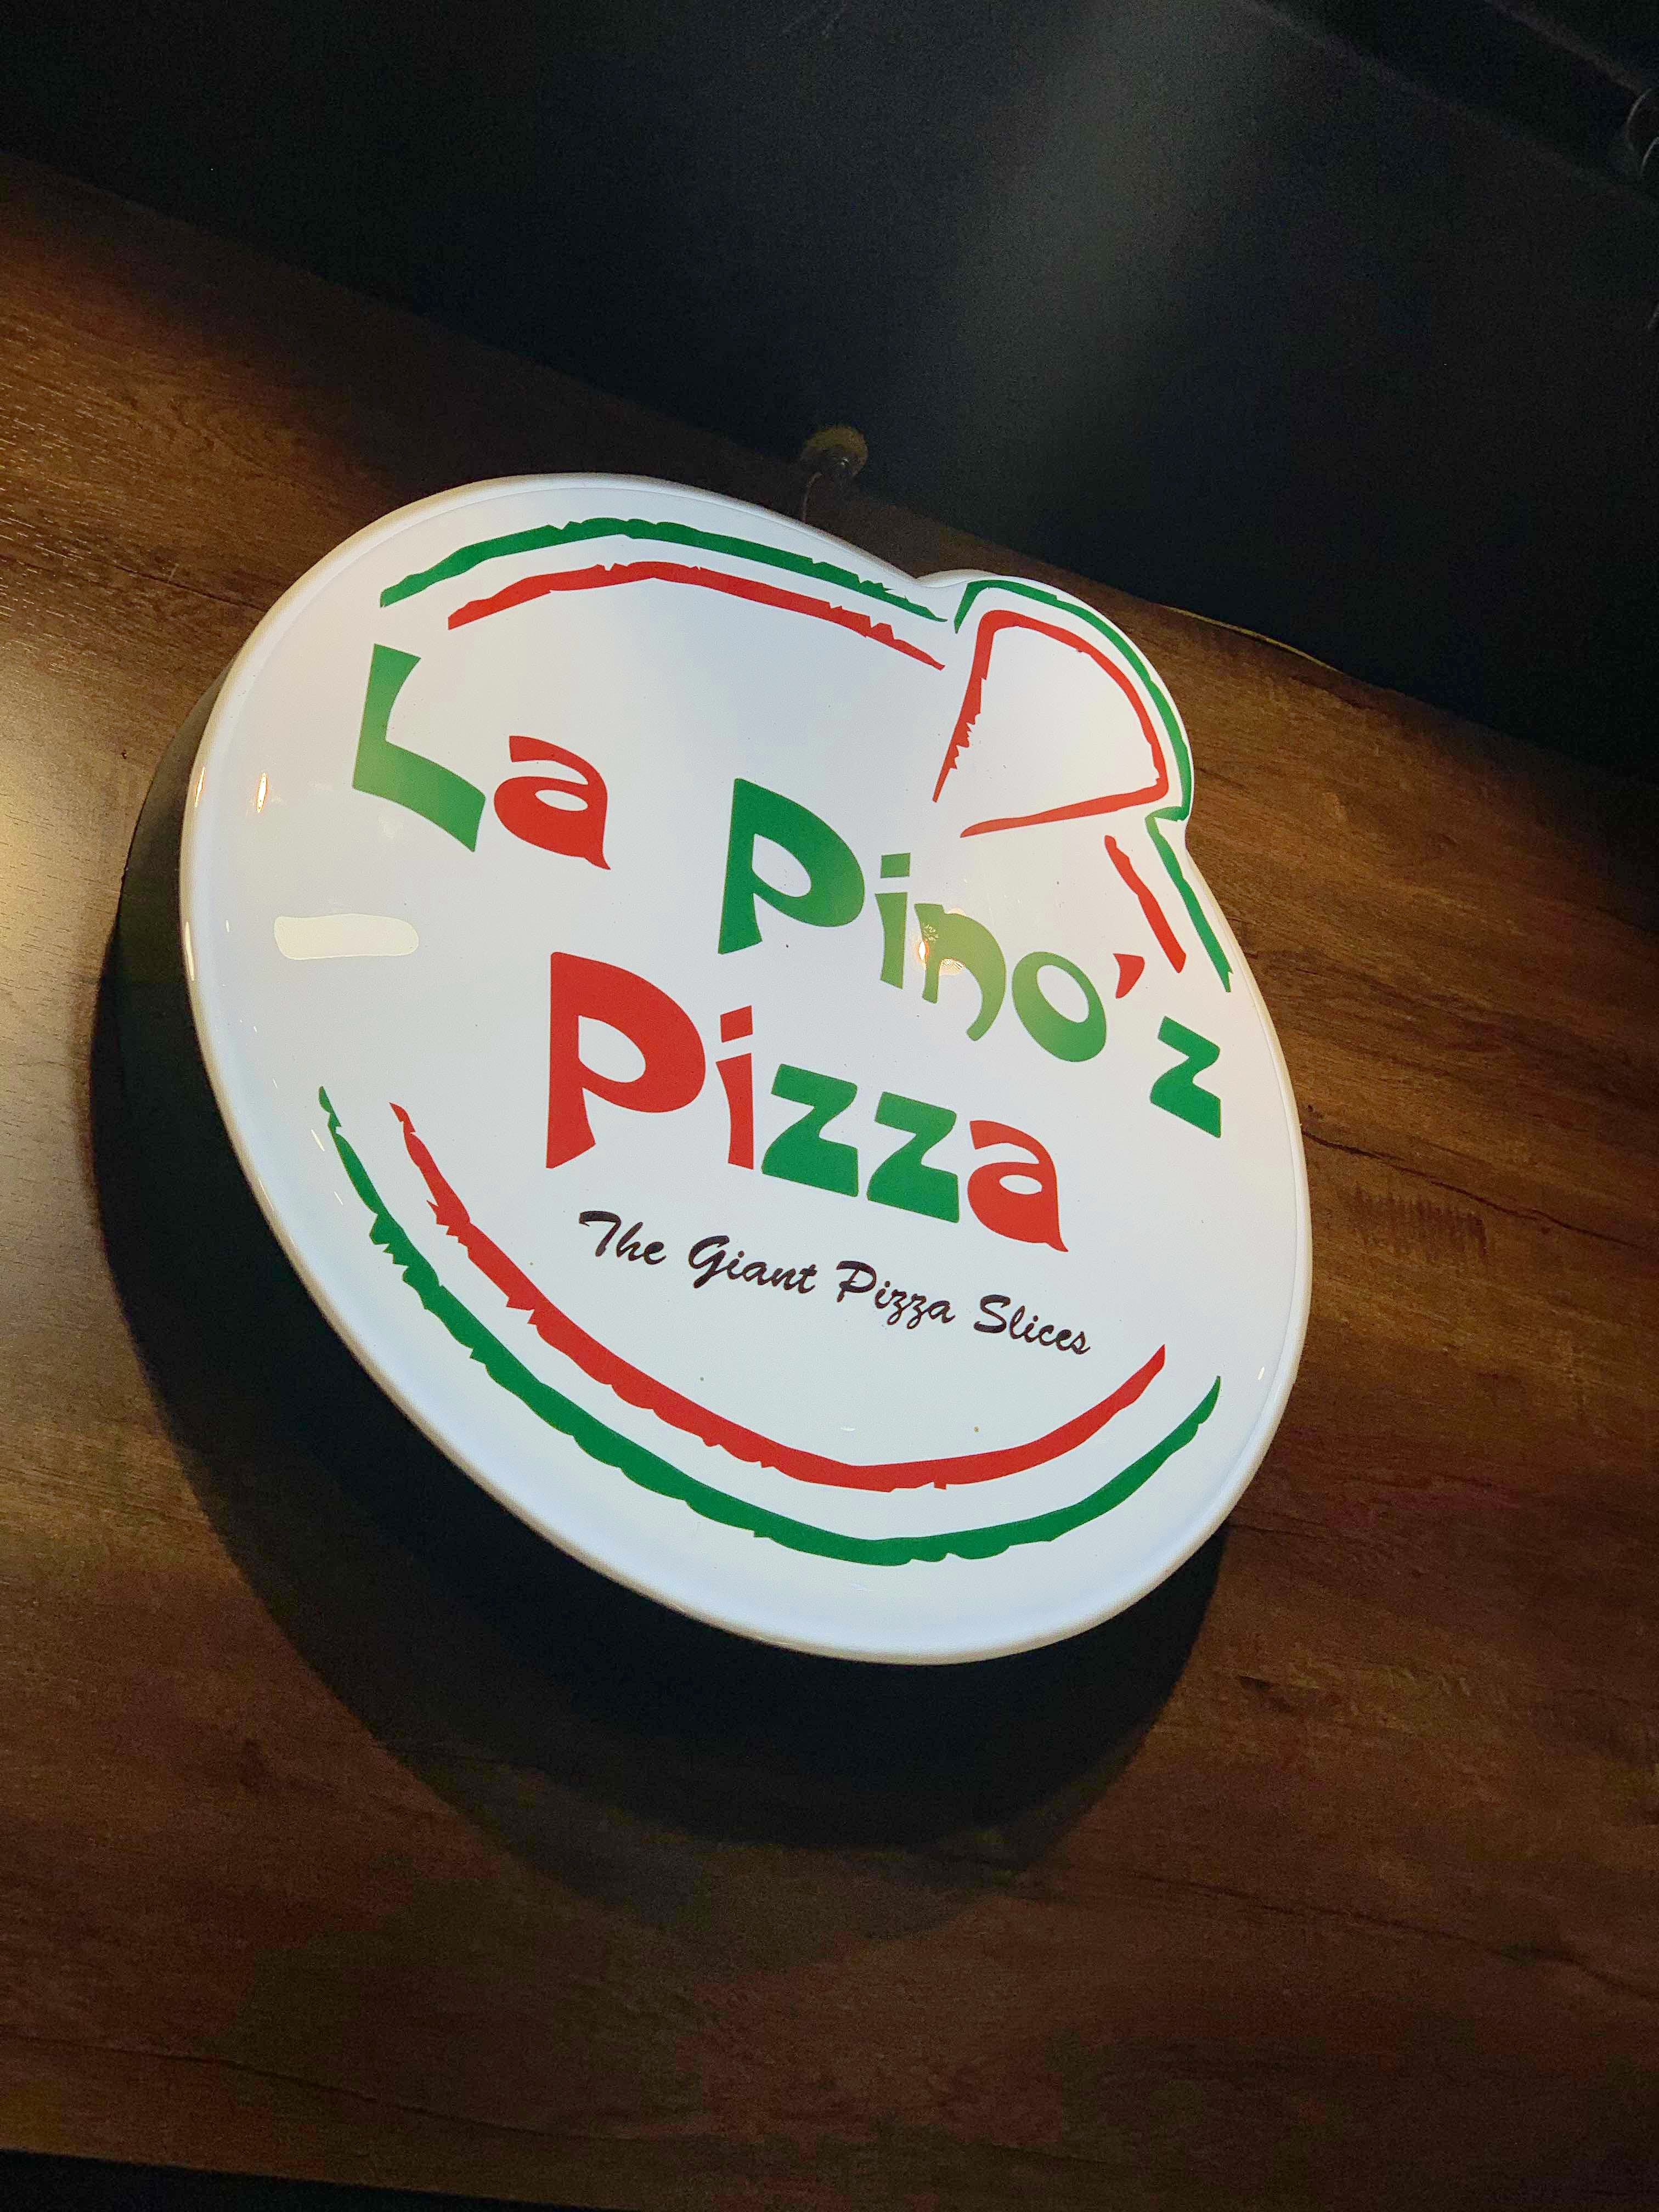 Mountain Mike's Pizza to Host “Pizza 4 a Purpose”